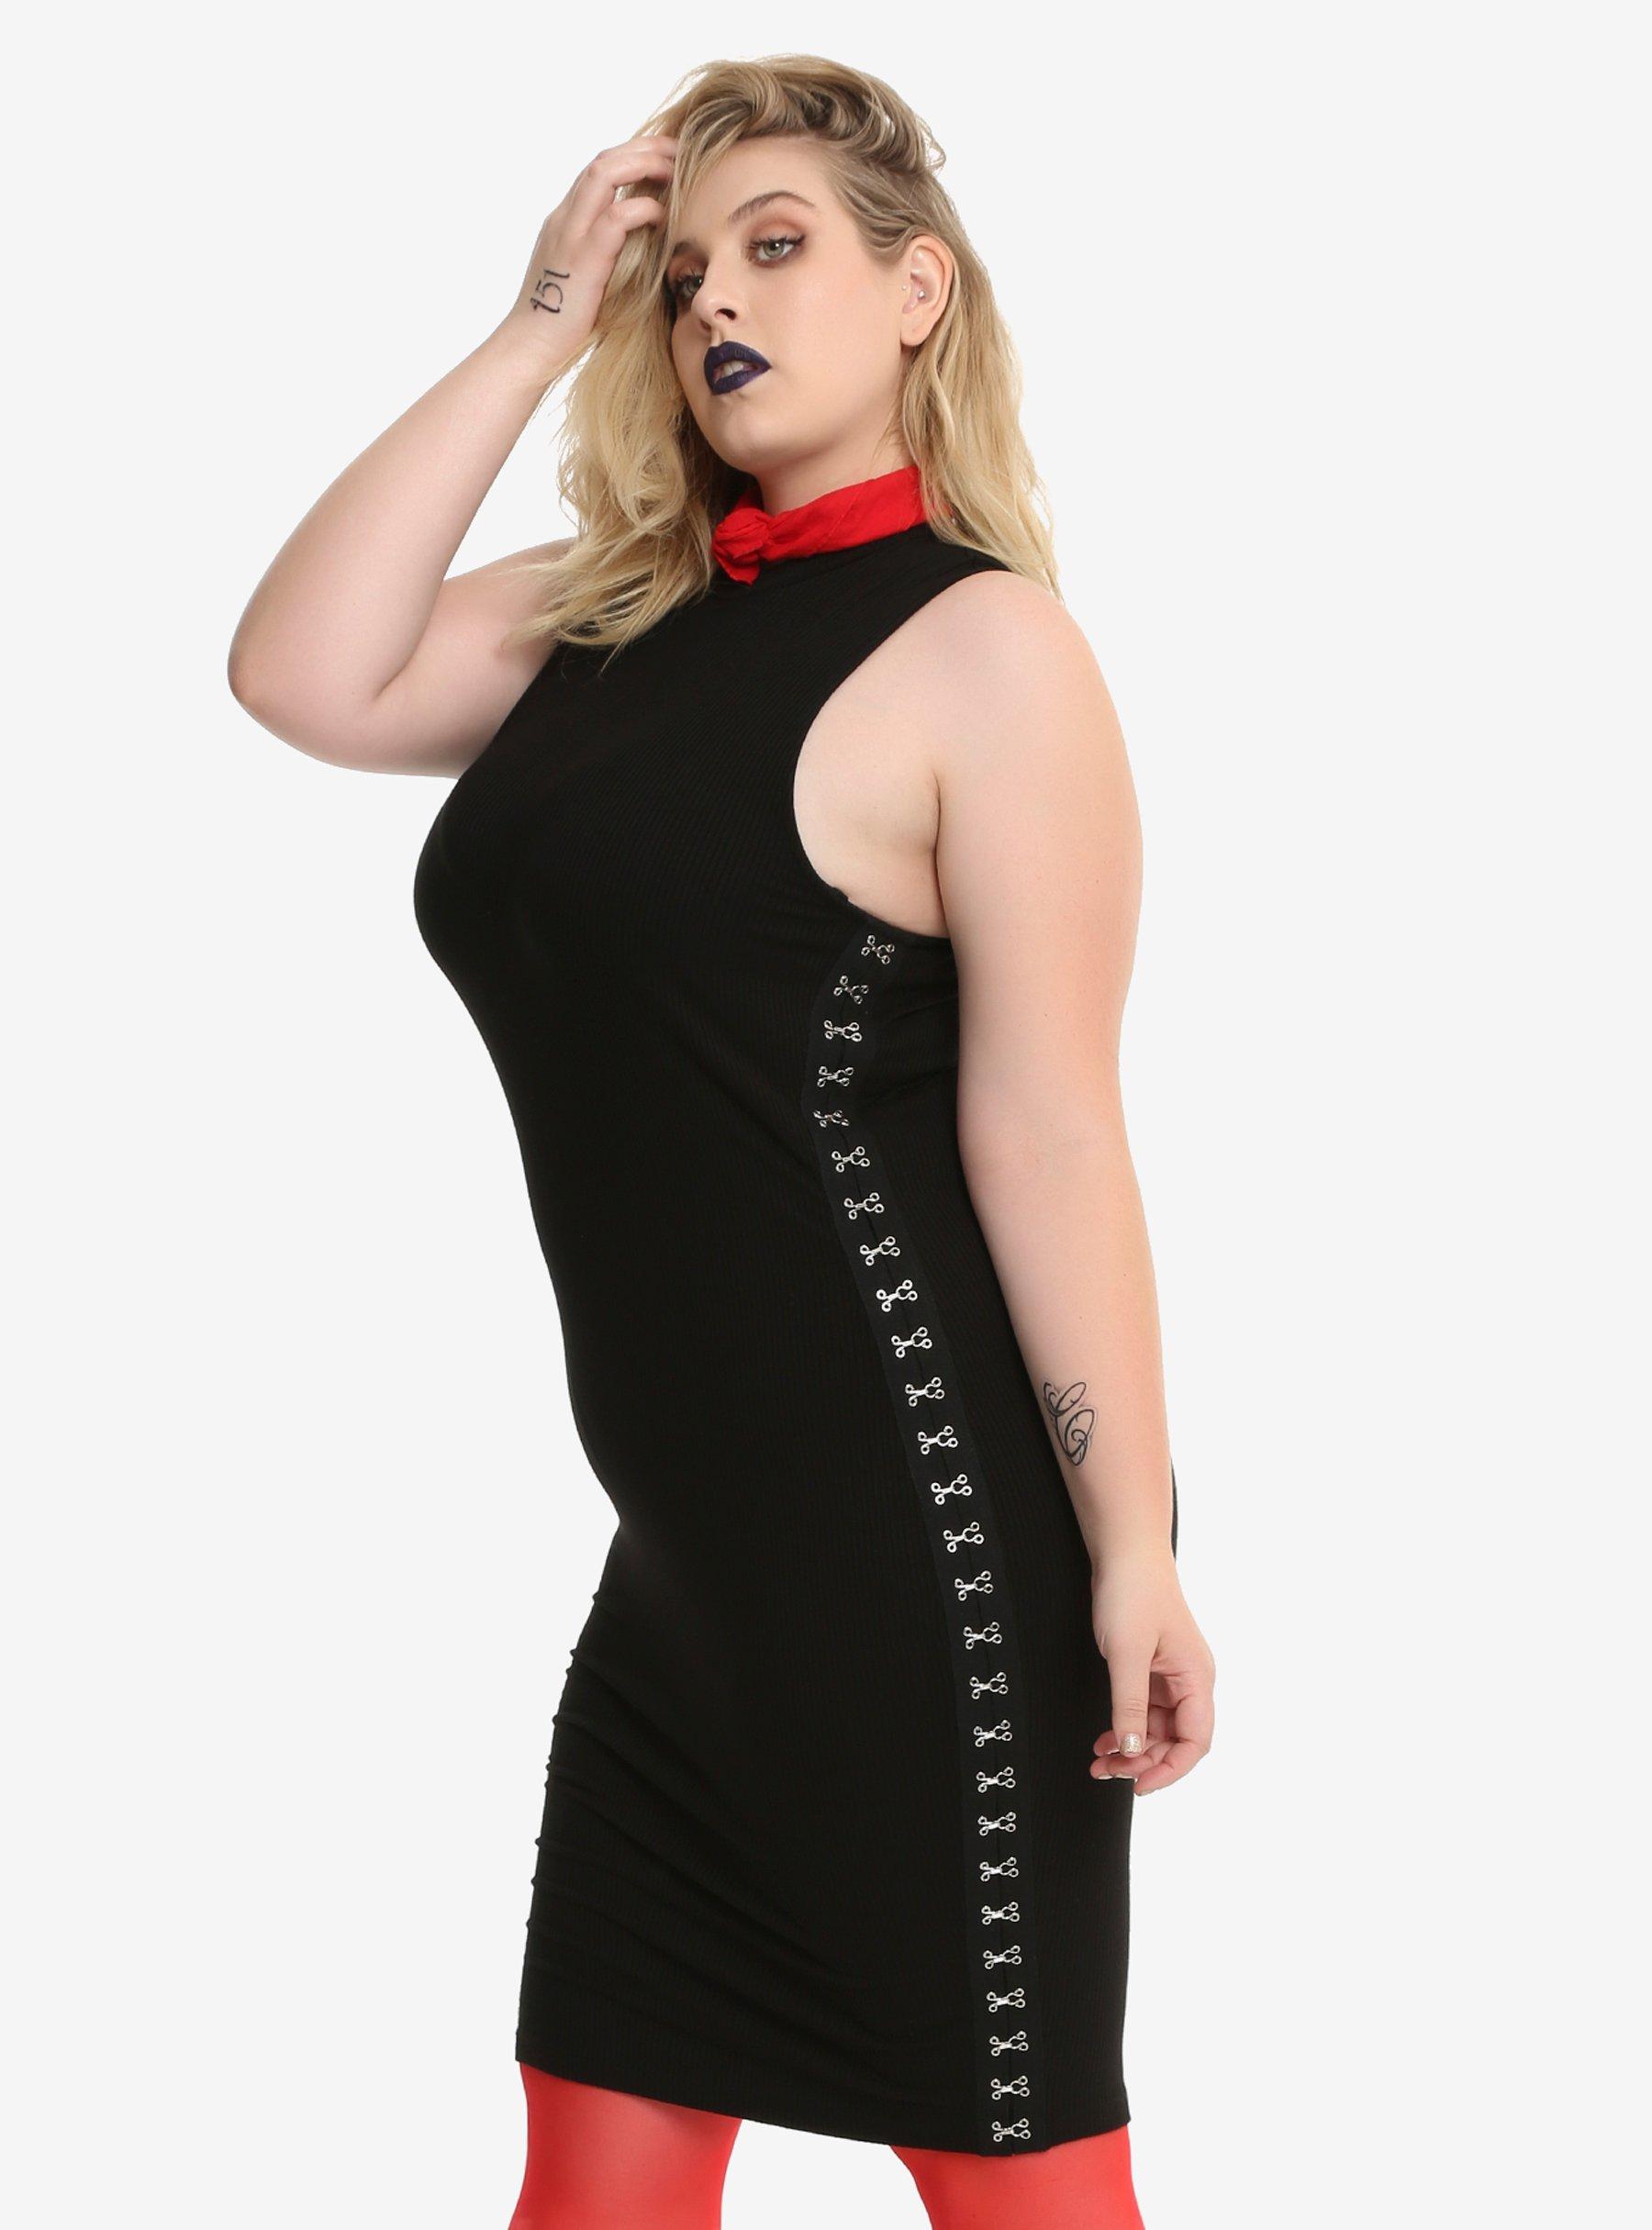 Black Hook And Eye Bodycon Dress Plus Size Hot Topic